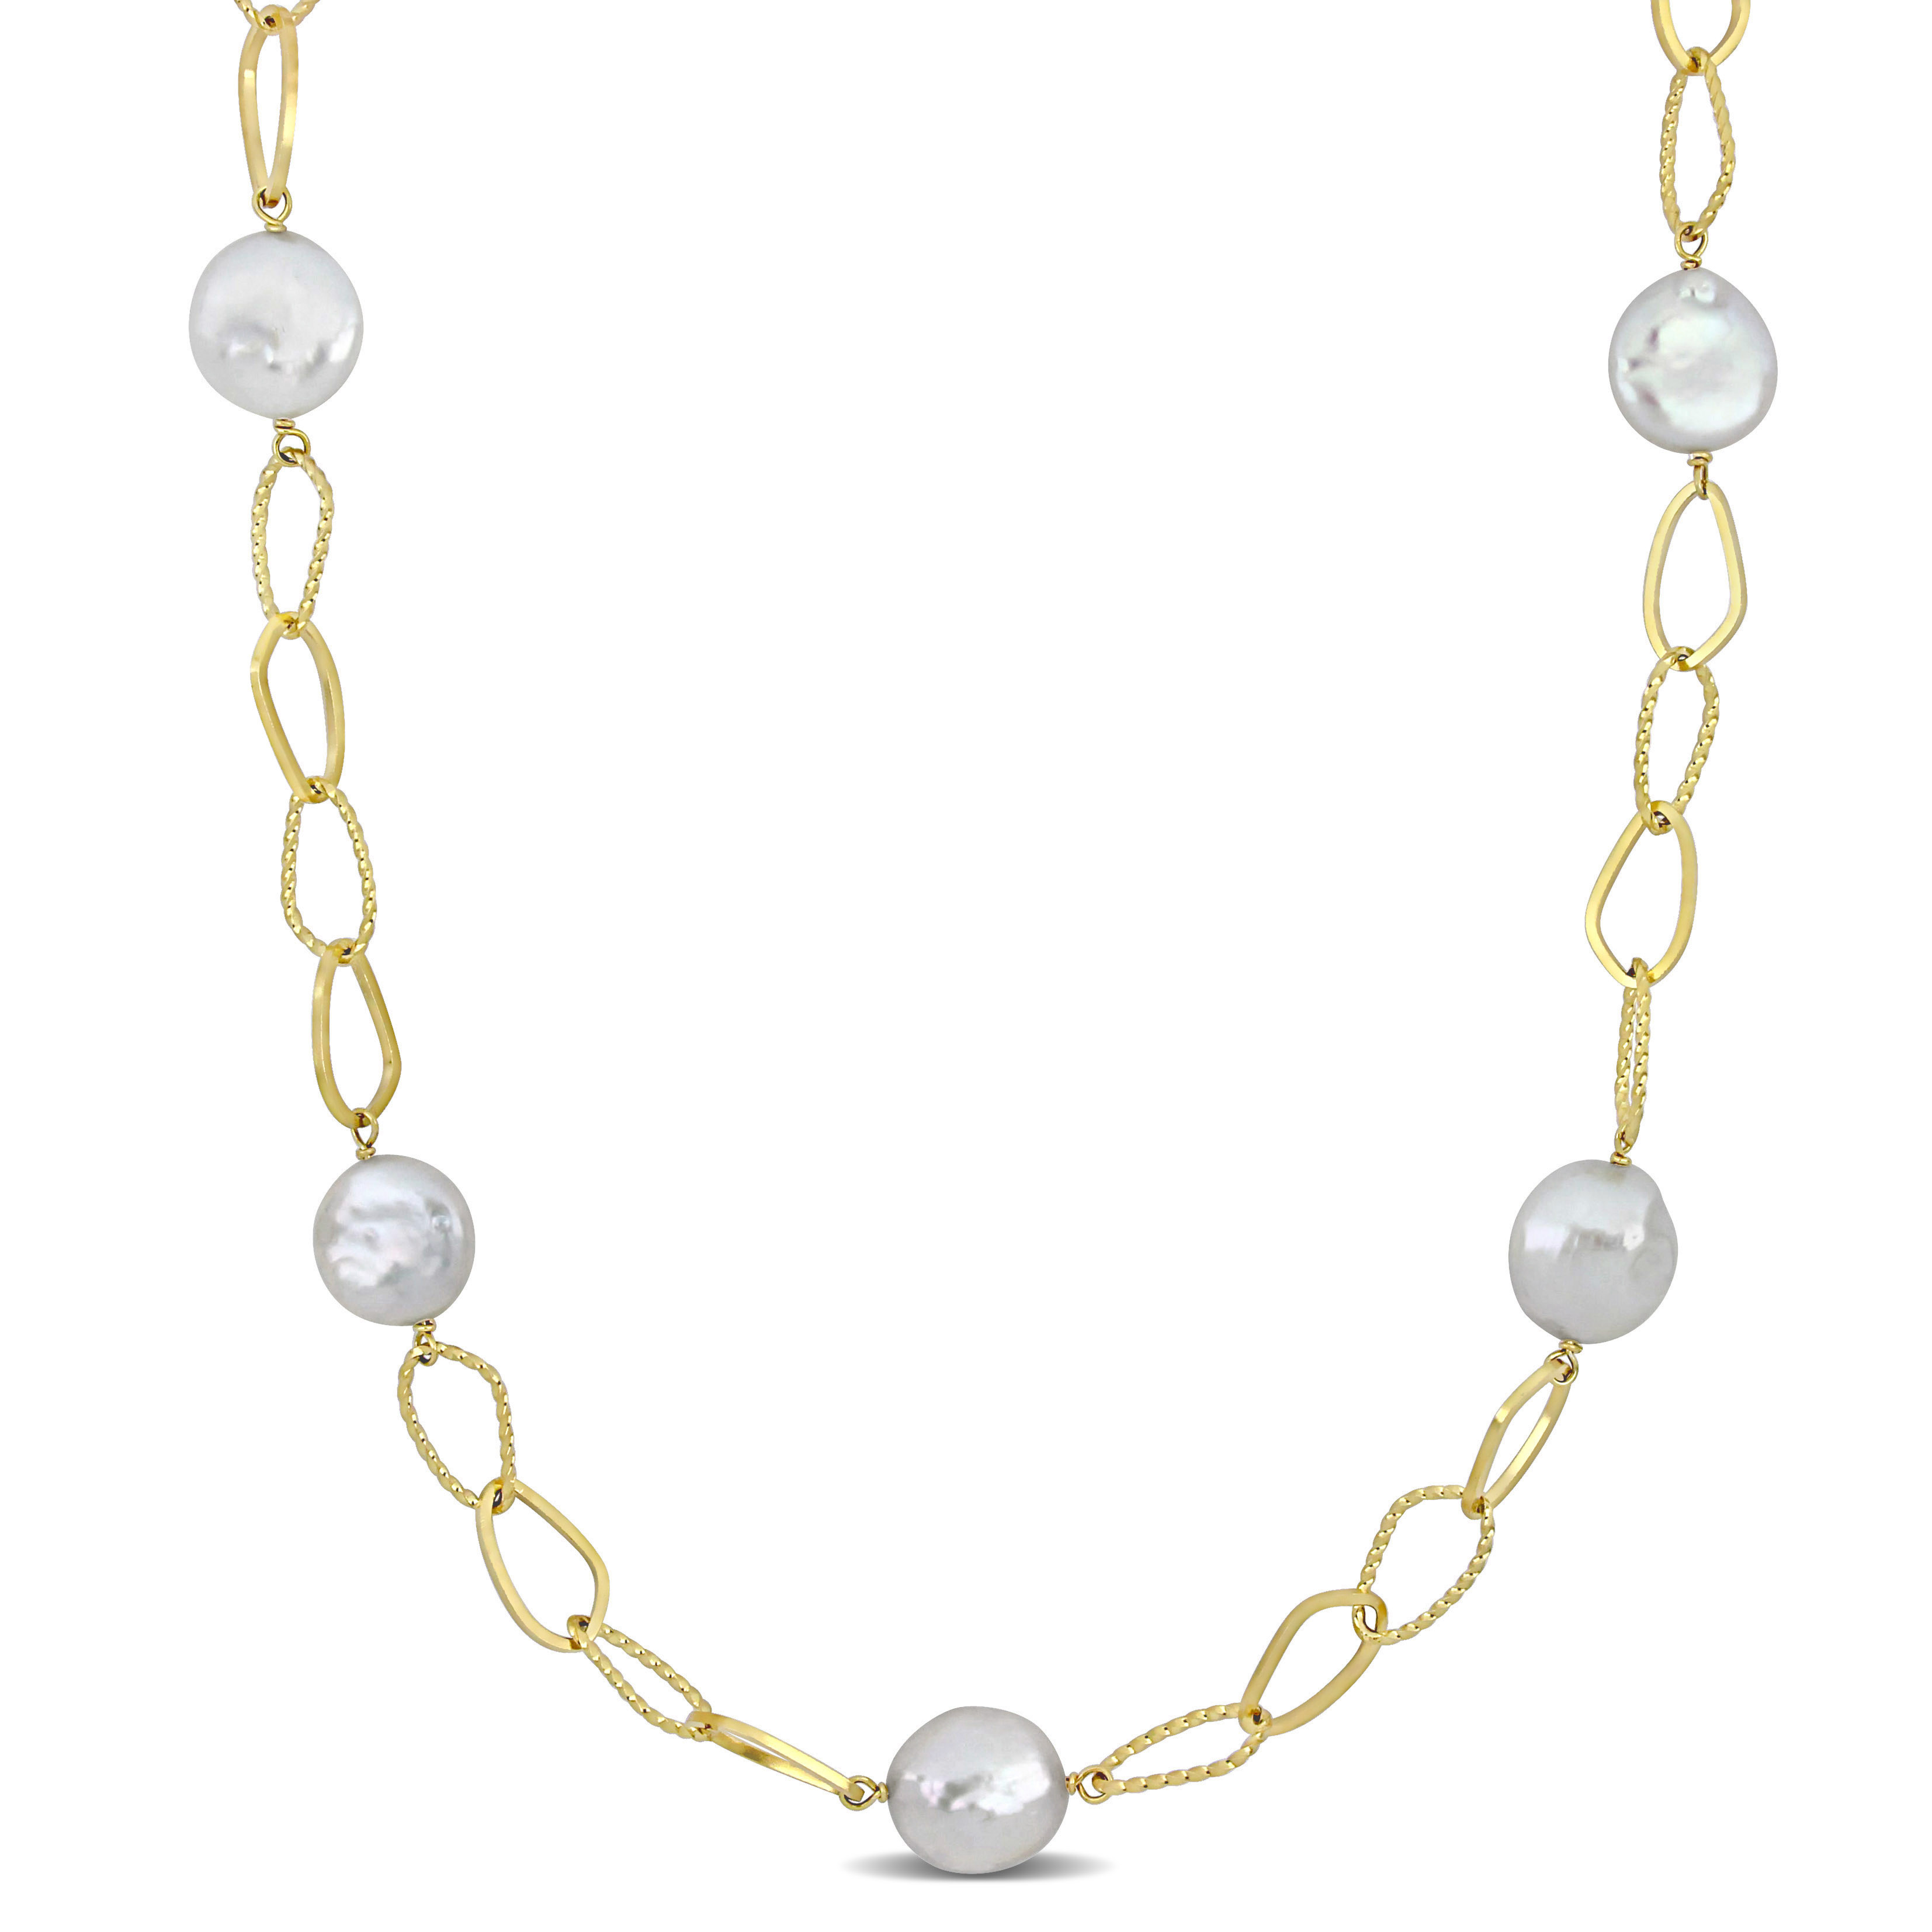 14-15 MM Cultured Freshwater Coin Pearl Station Chain Necklace in 18k Yellow Gold Plated Sterling Silver - 36 in.